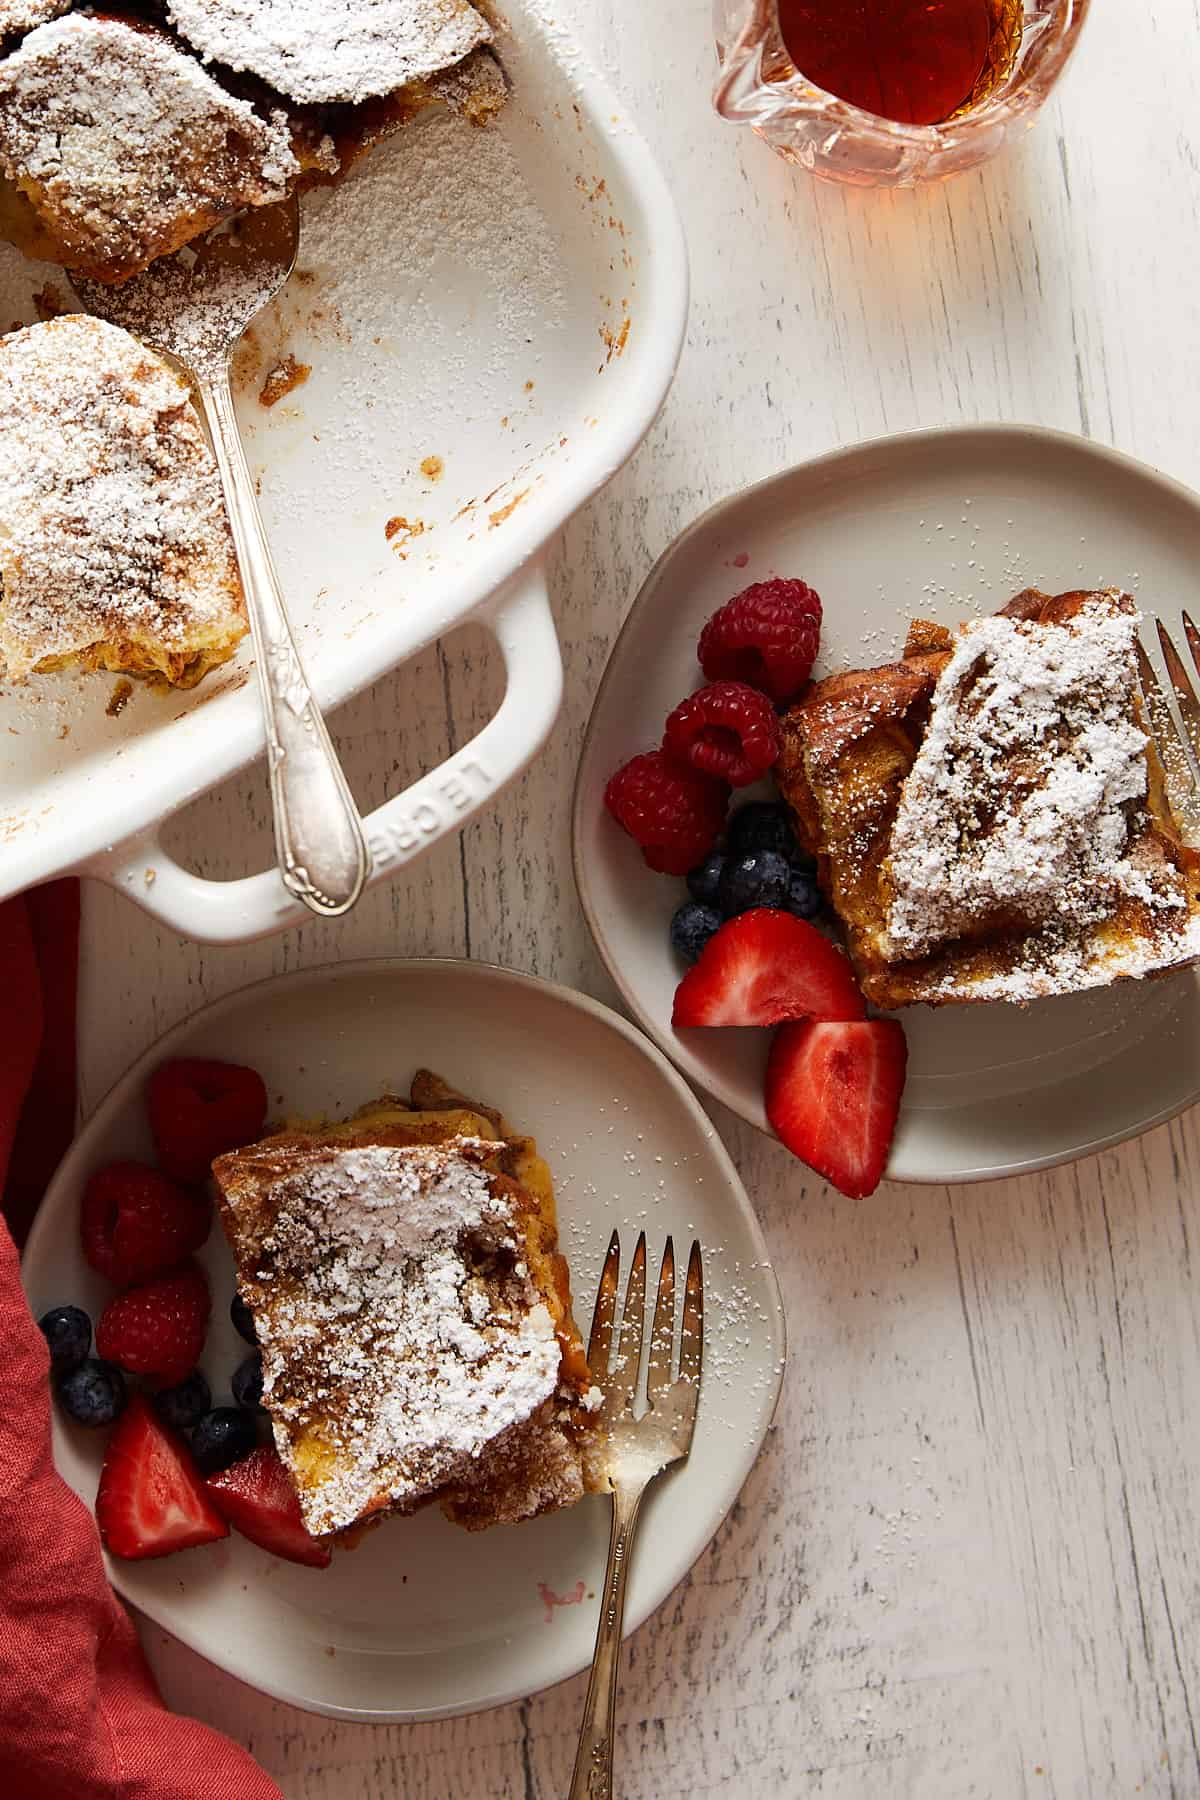 A plated serving of Challah French Toast Casserole topped with syrup and fresh berries.